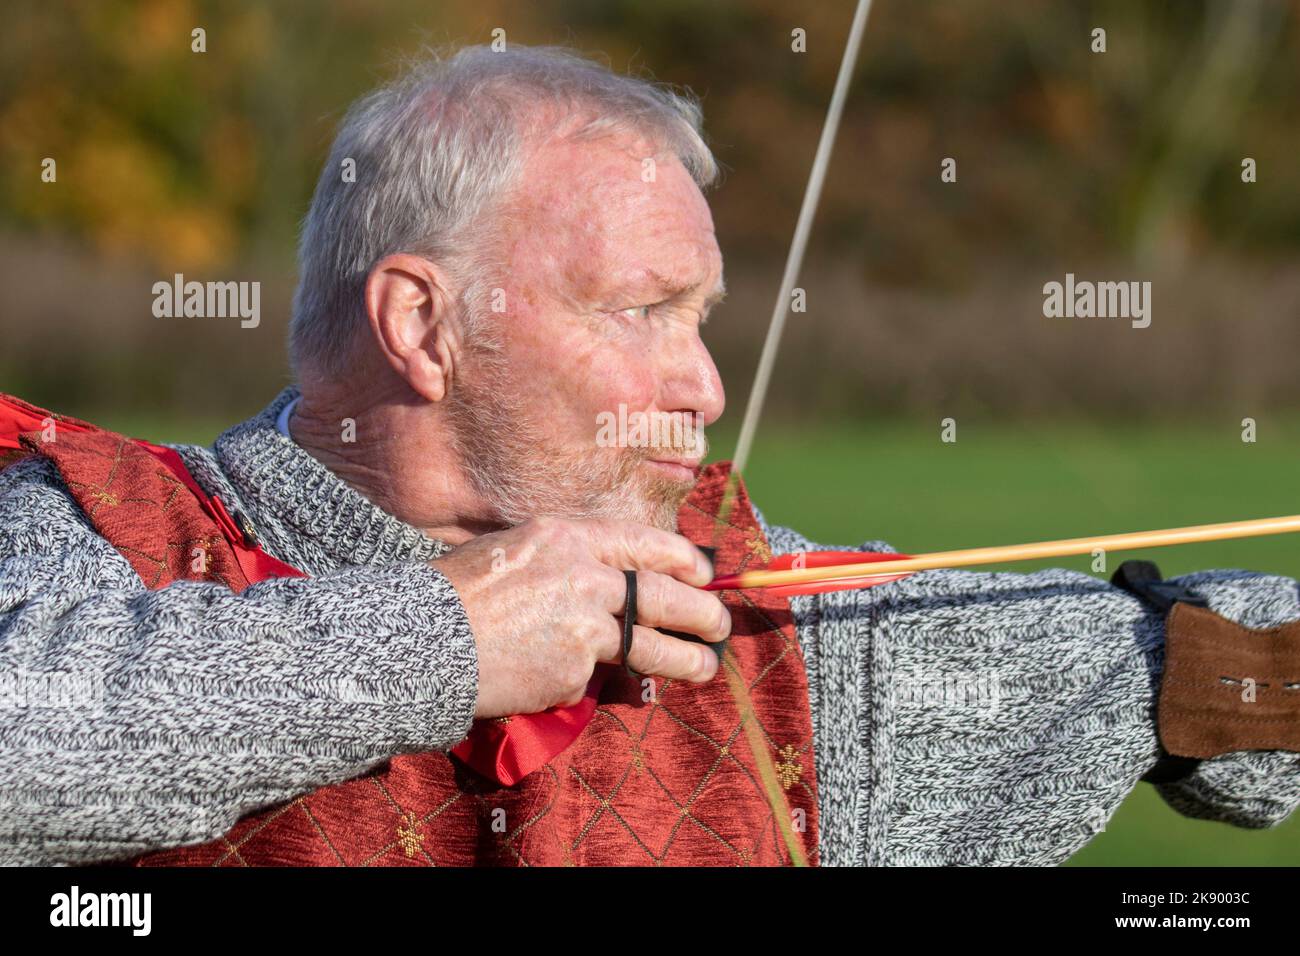 UK News Weather; Tuesday 25th October 2022. SAMLESBURY LONGBOW ARCHERS THE BATTLE OF AGINCOURT - 1415 reenactment. Traditional long bow archery shoot on of the battle anniversary in medieval dress, British Long-Bow Society (BLBS) event. Credit; MediaWorldImages/AlamyLiveNews Stock Photo